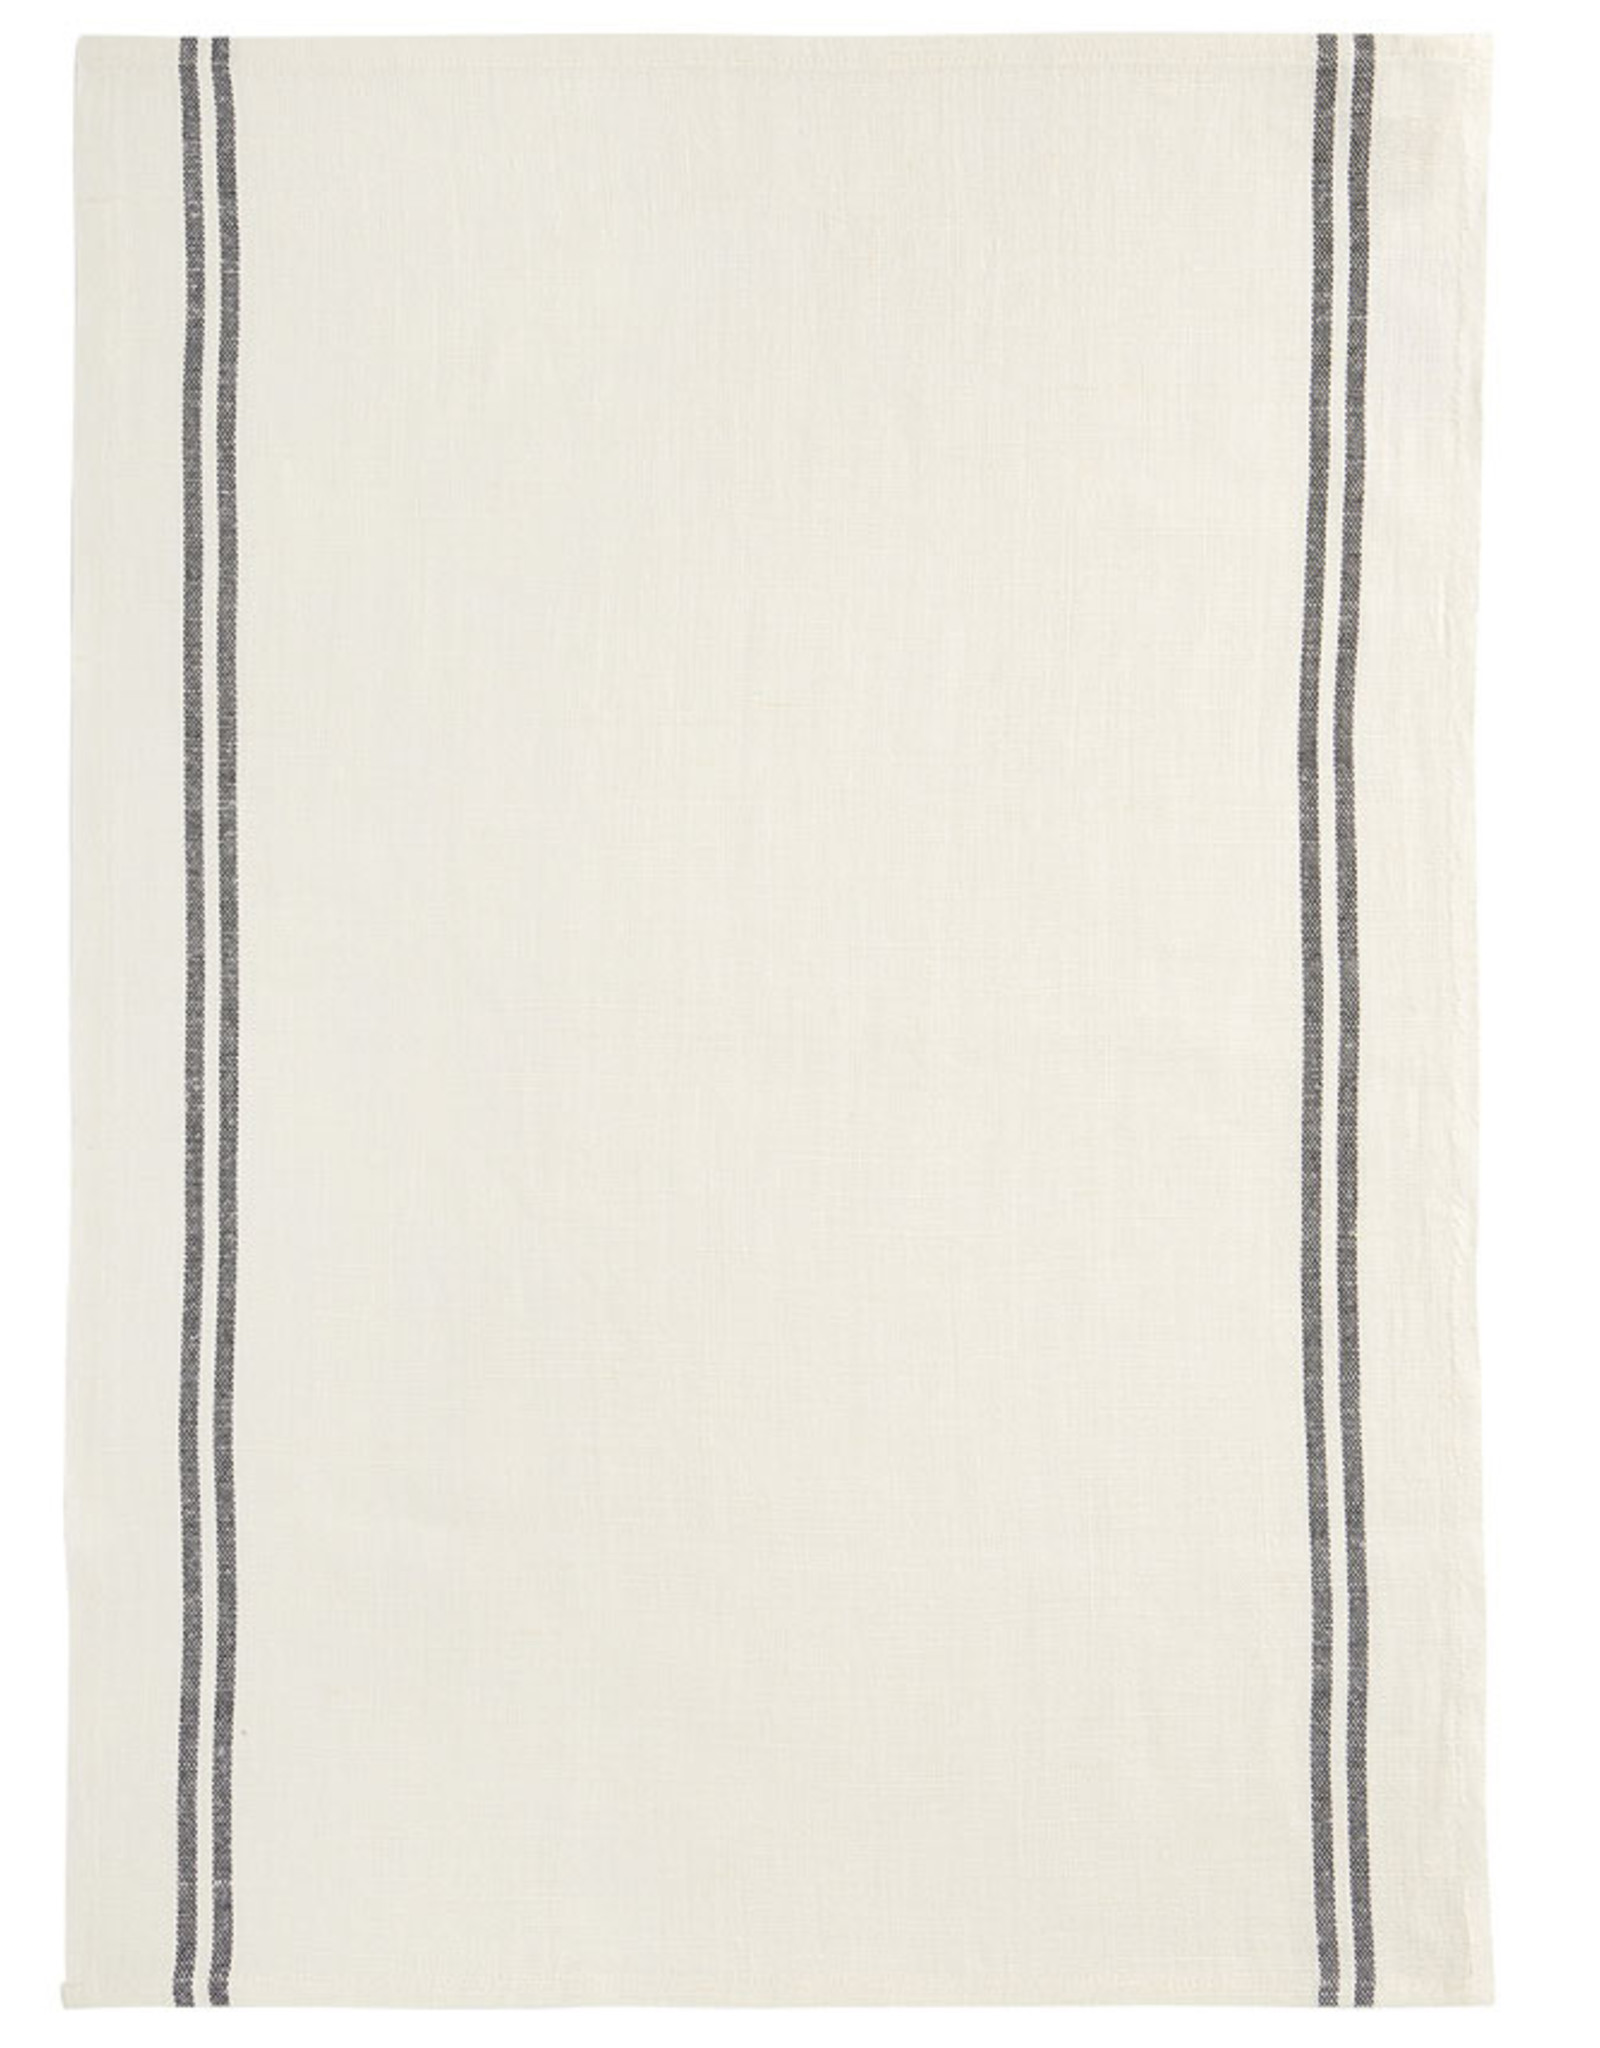 Country White with Black Stripe Washed Linen Tea Towel